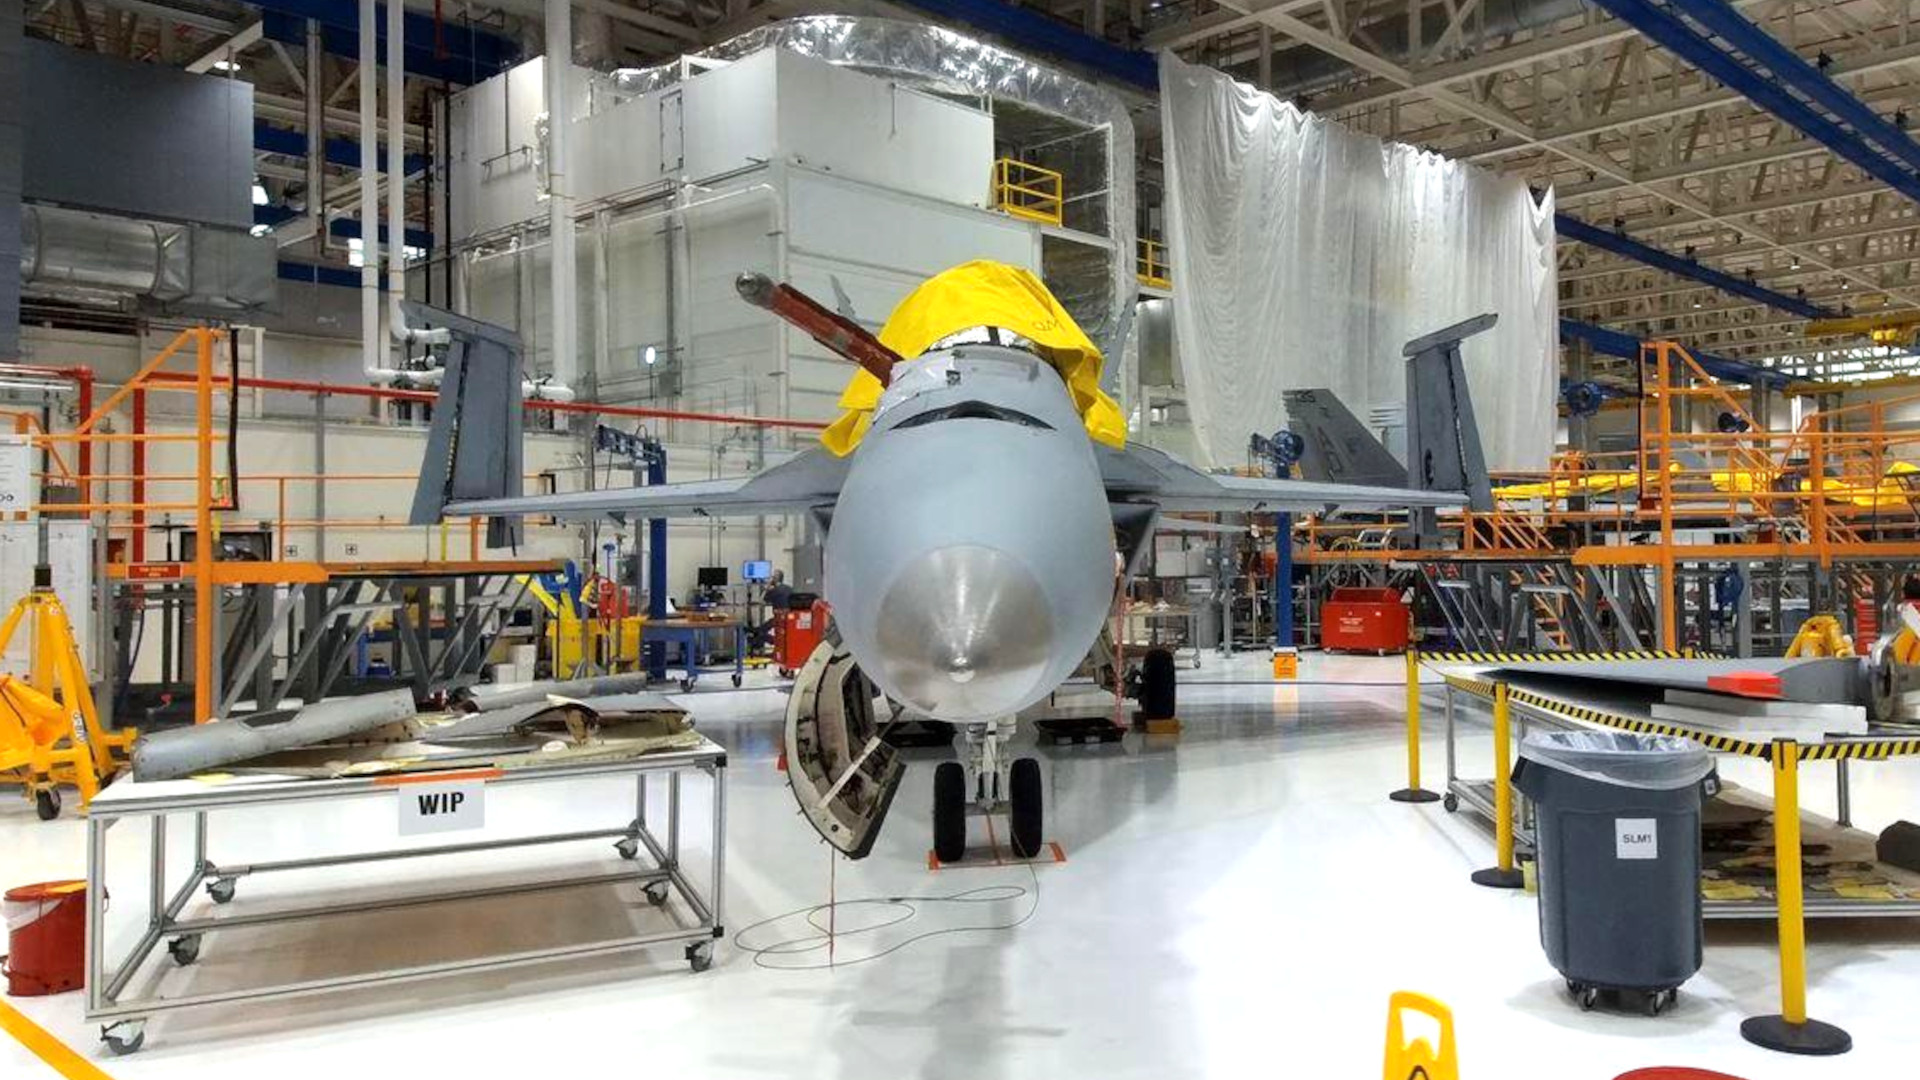 Boeing To End F/A-18 Super Hornet Production In Two Years